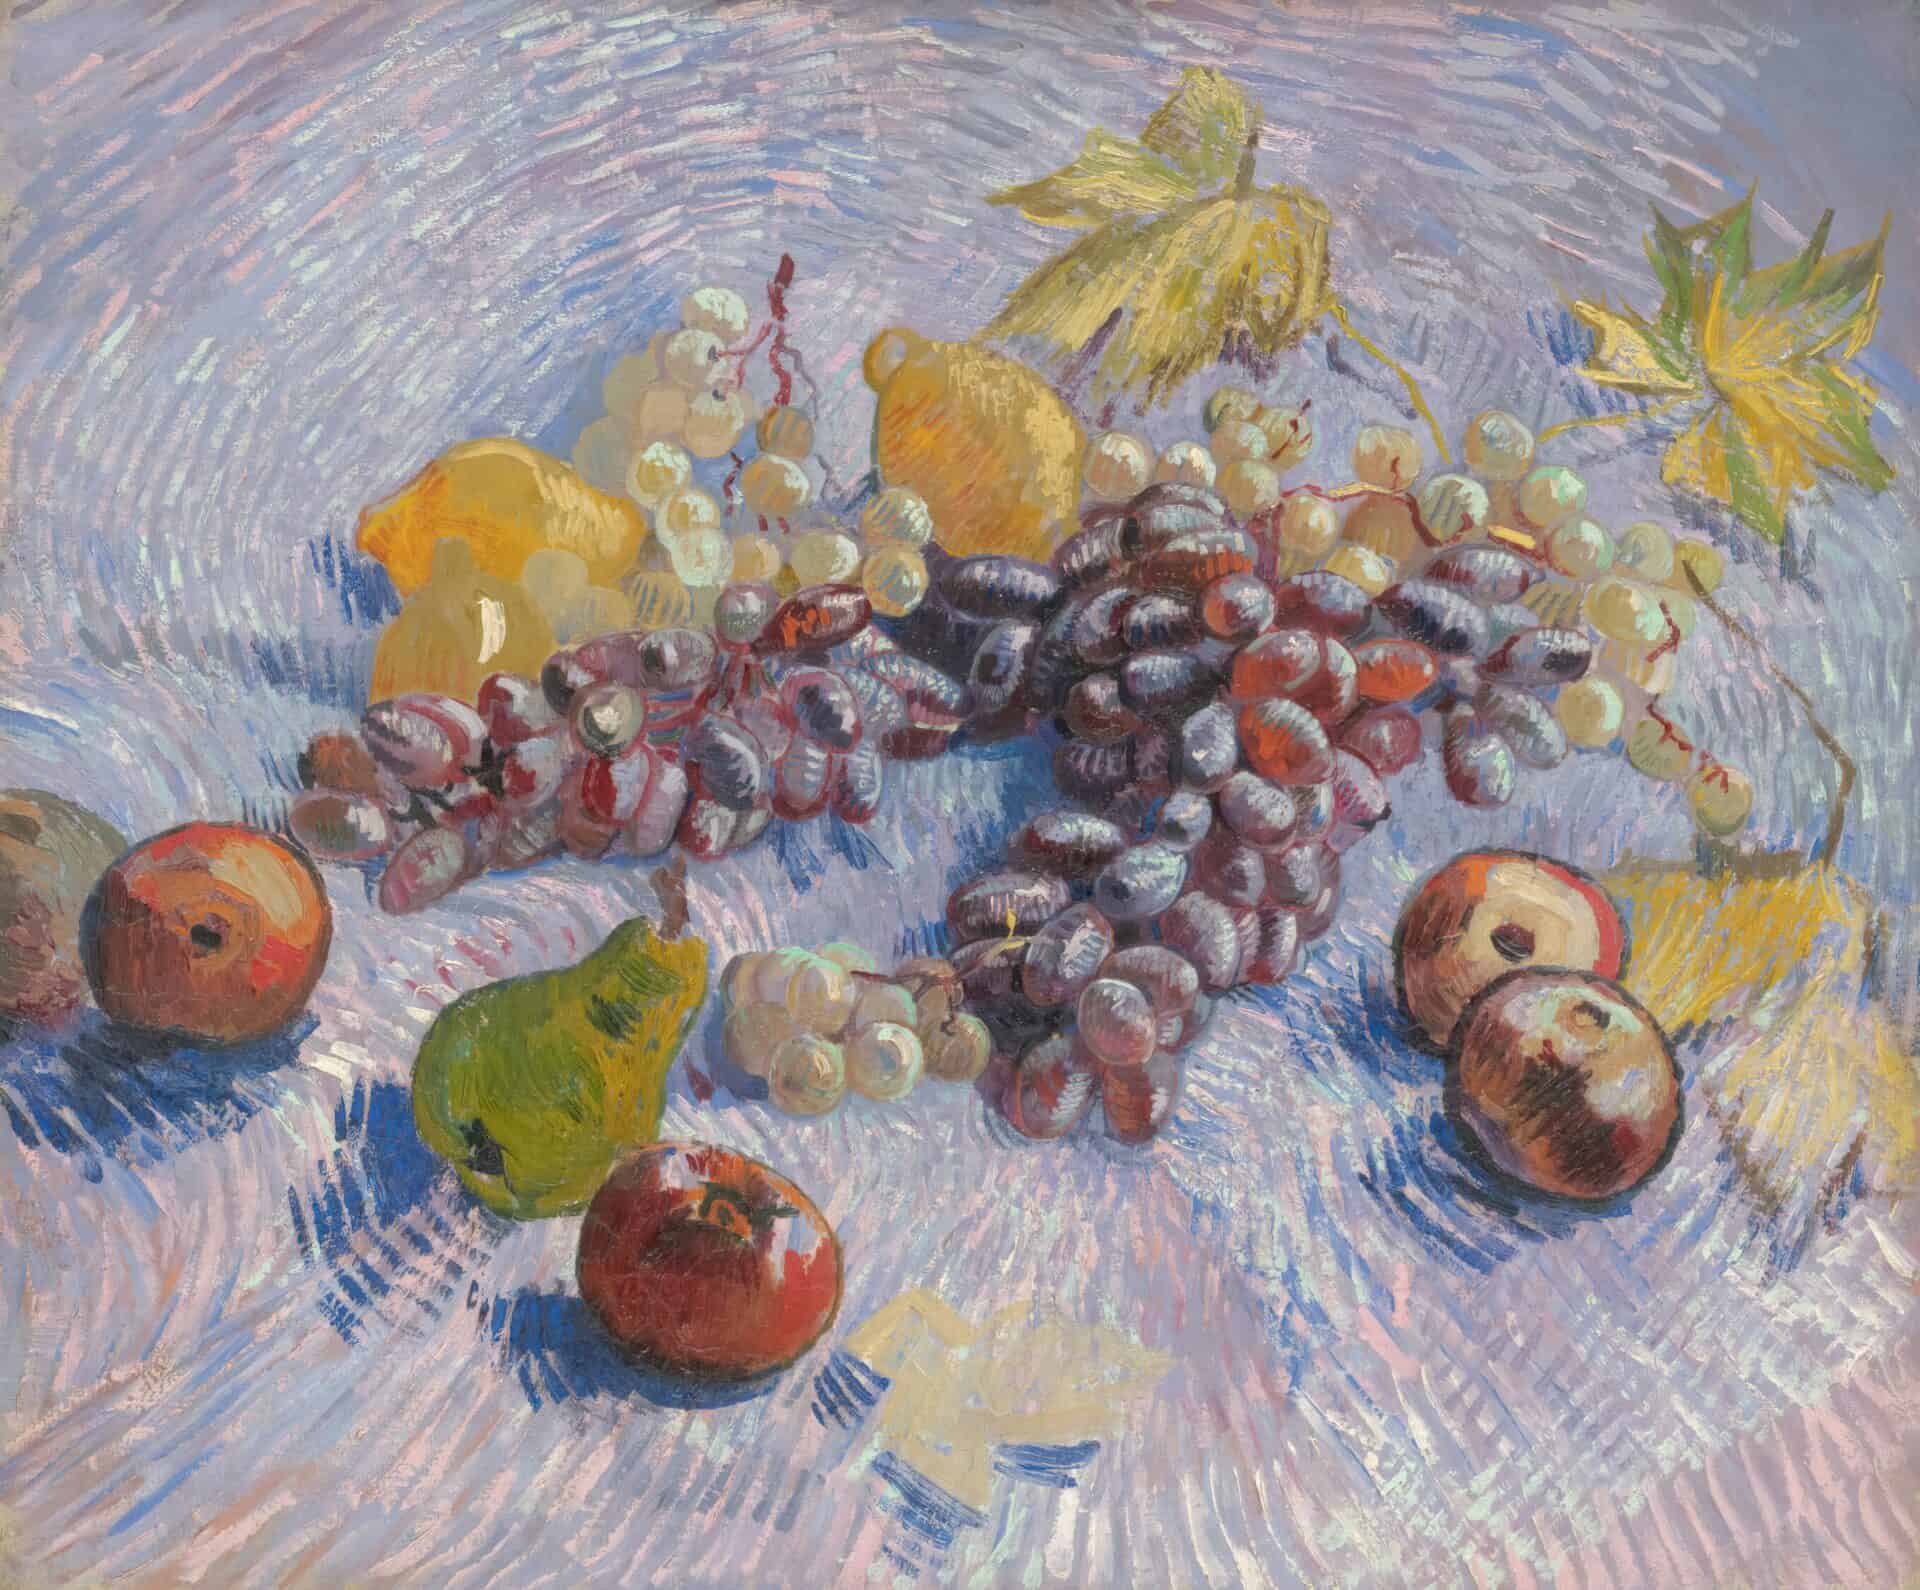 Impressionist painting of colorful fruits on a textured surface.